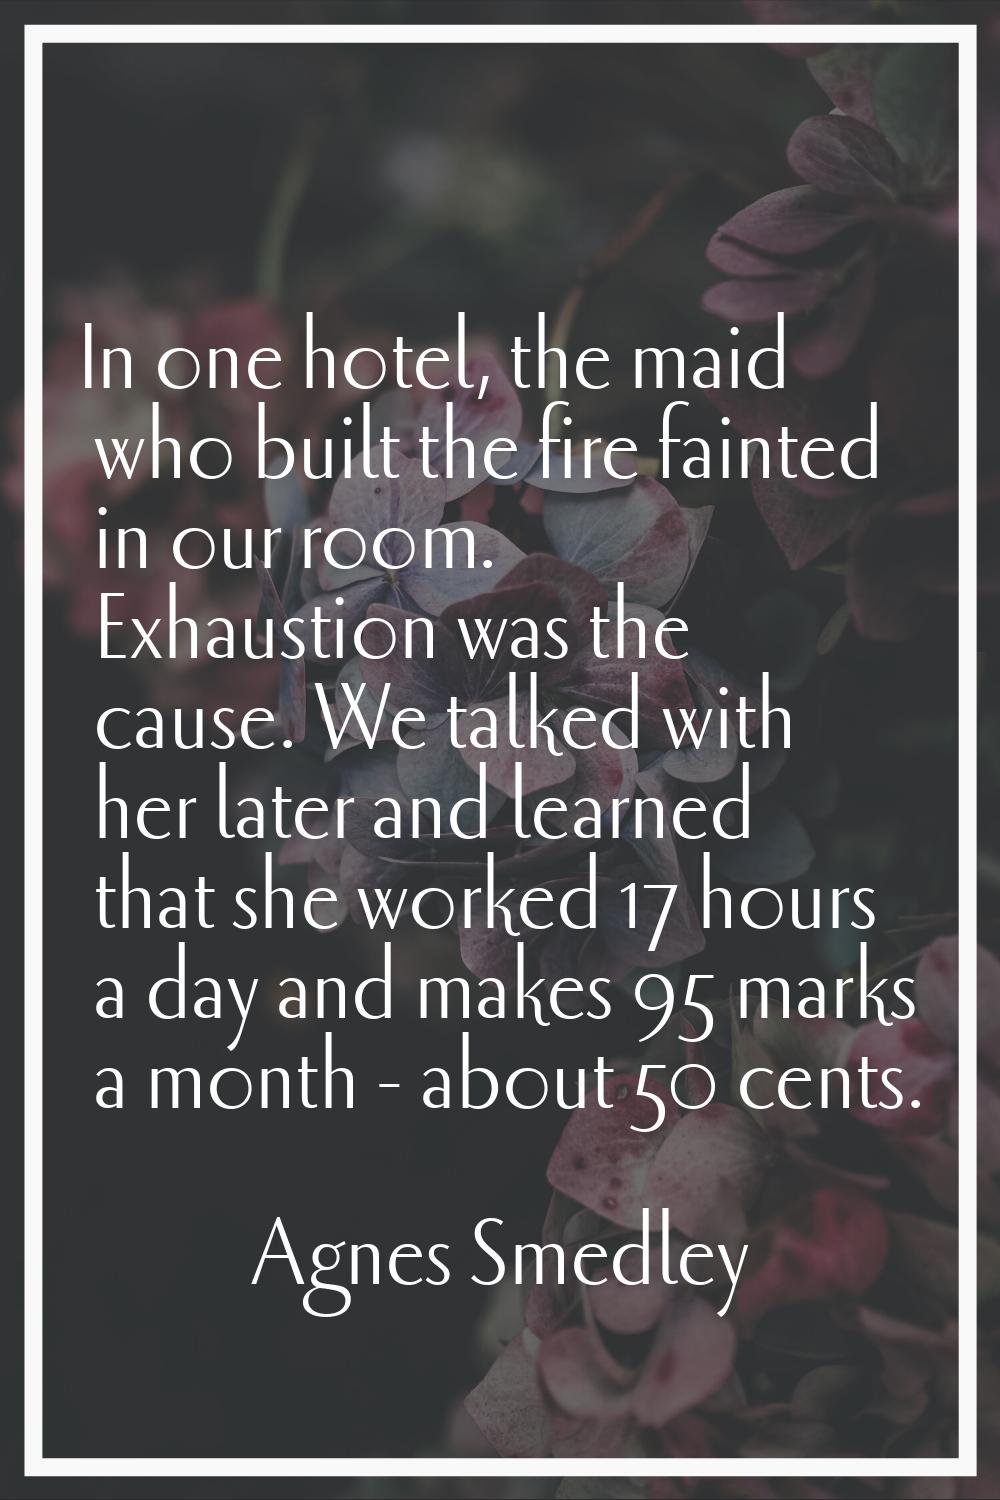 In one hotel, the maid who built the fire fainted in our room. Exhaustion was the cause. We talked 